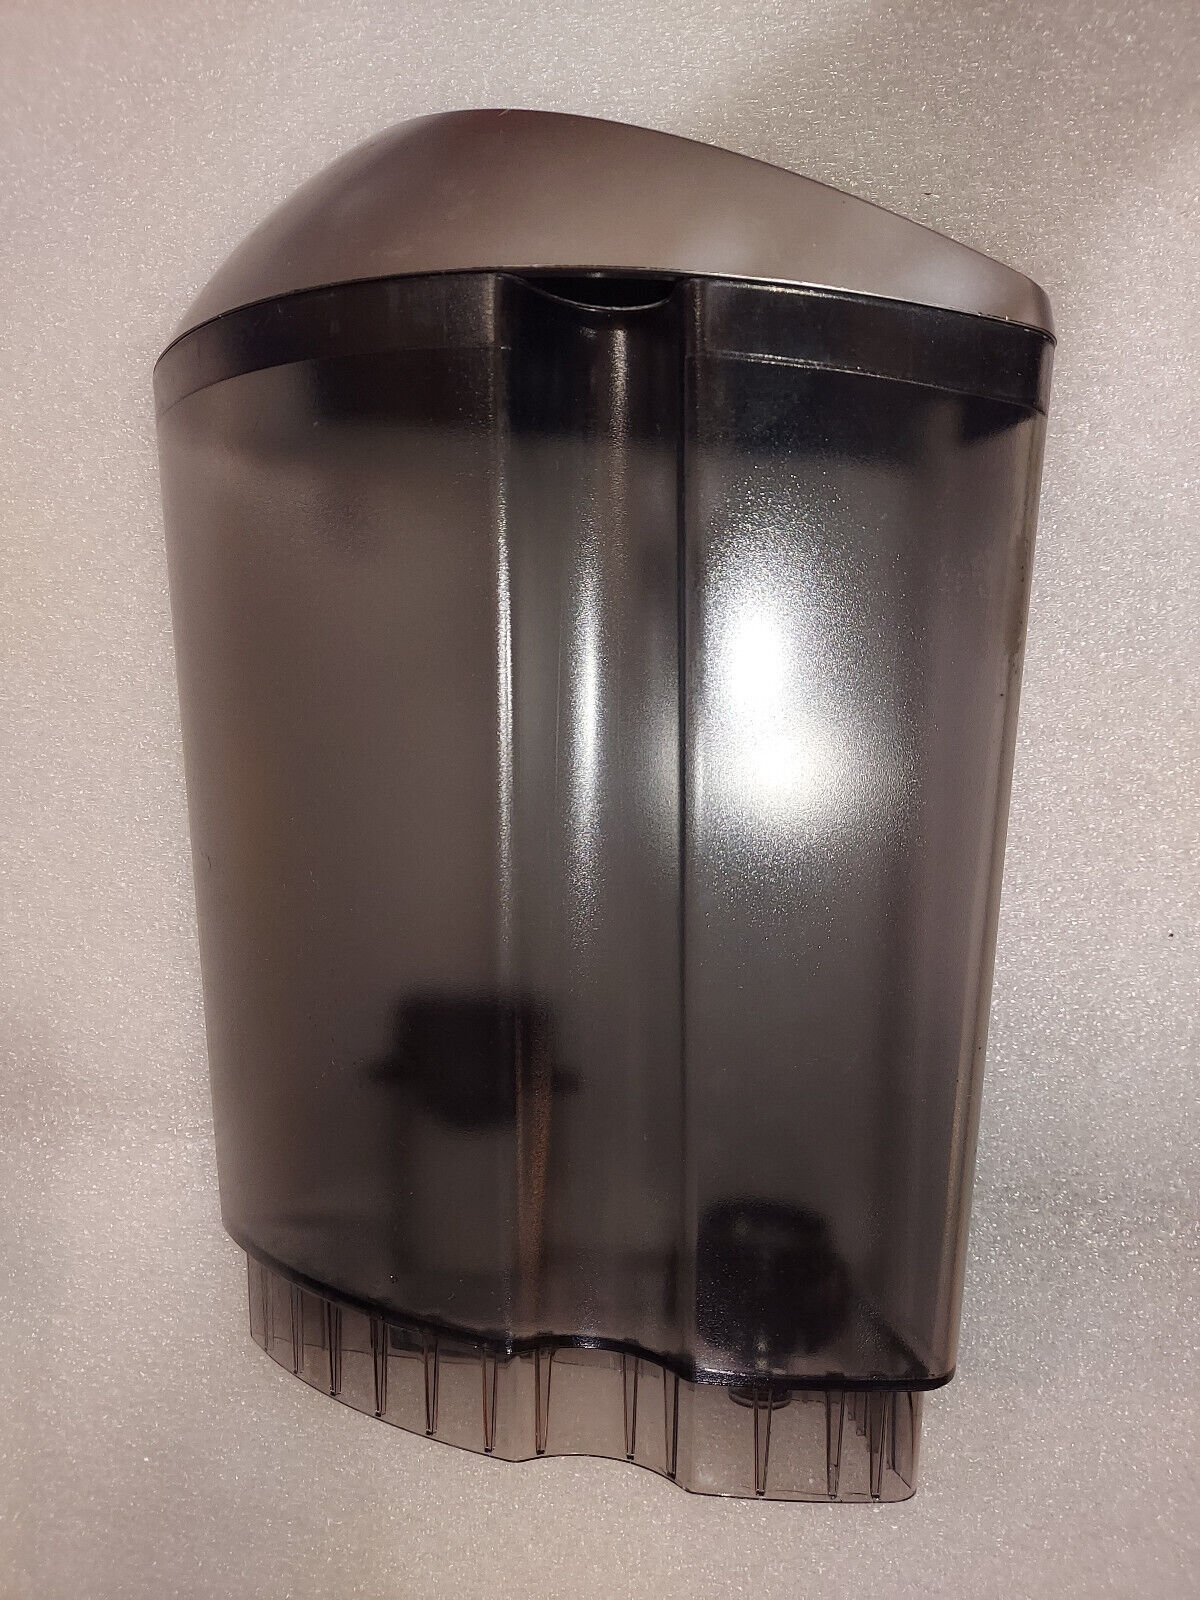 Primary image for 23CC52 KEURIG B60 WATER TANK, VERY GOOD CONDITION